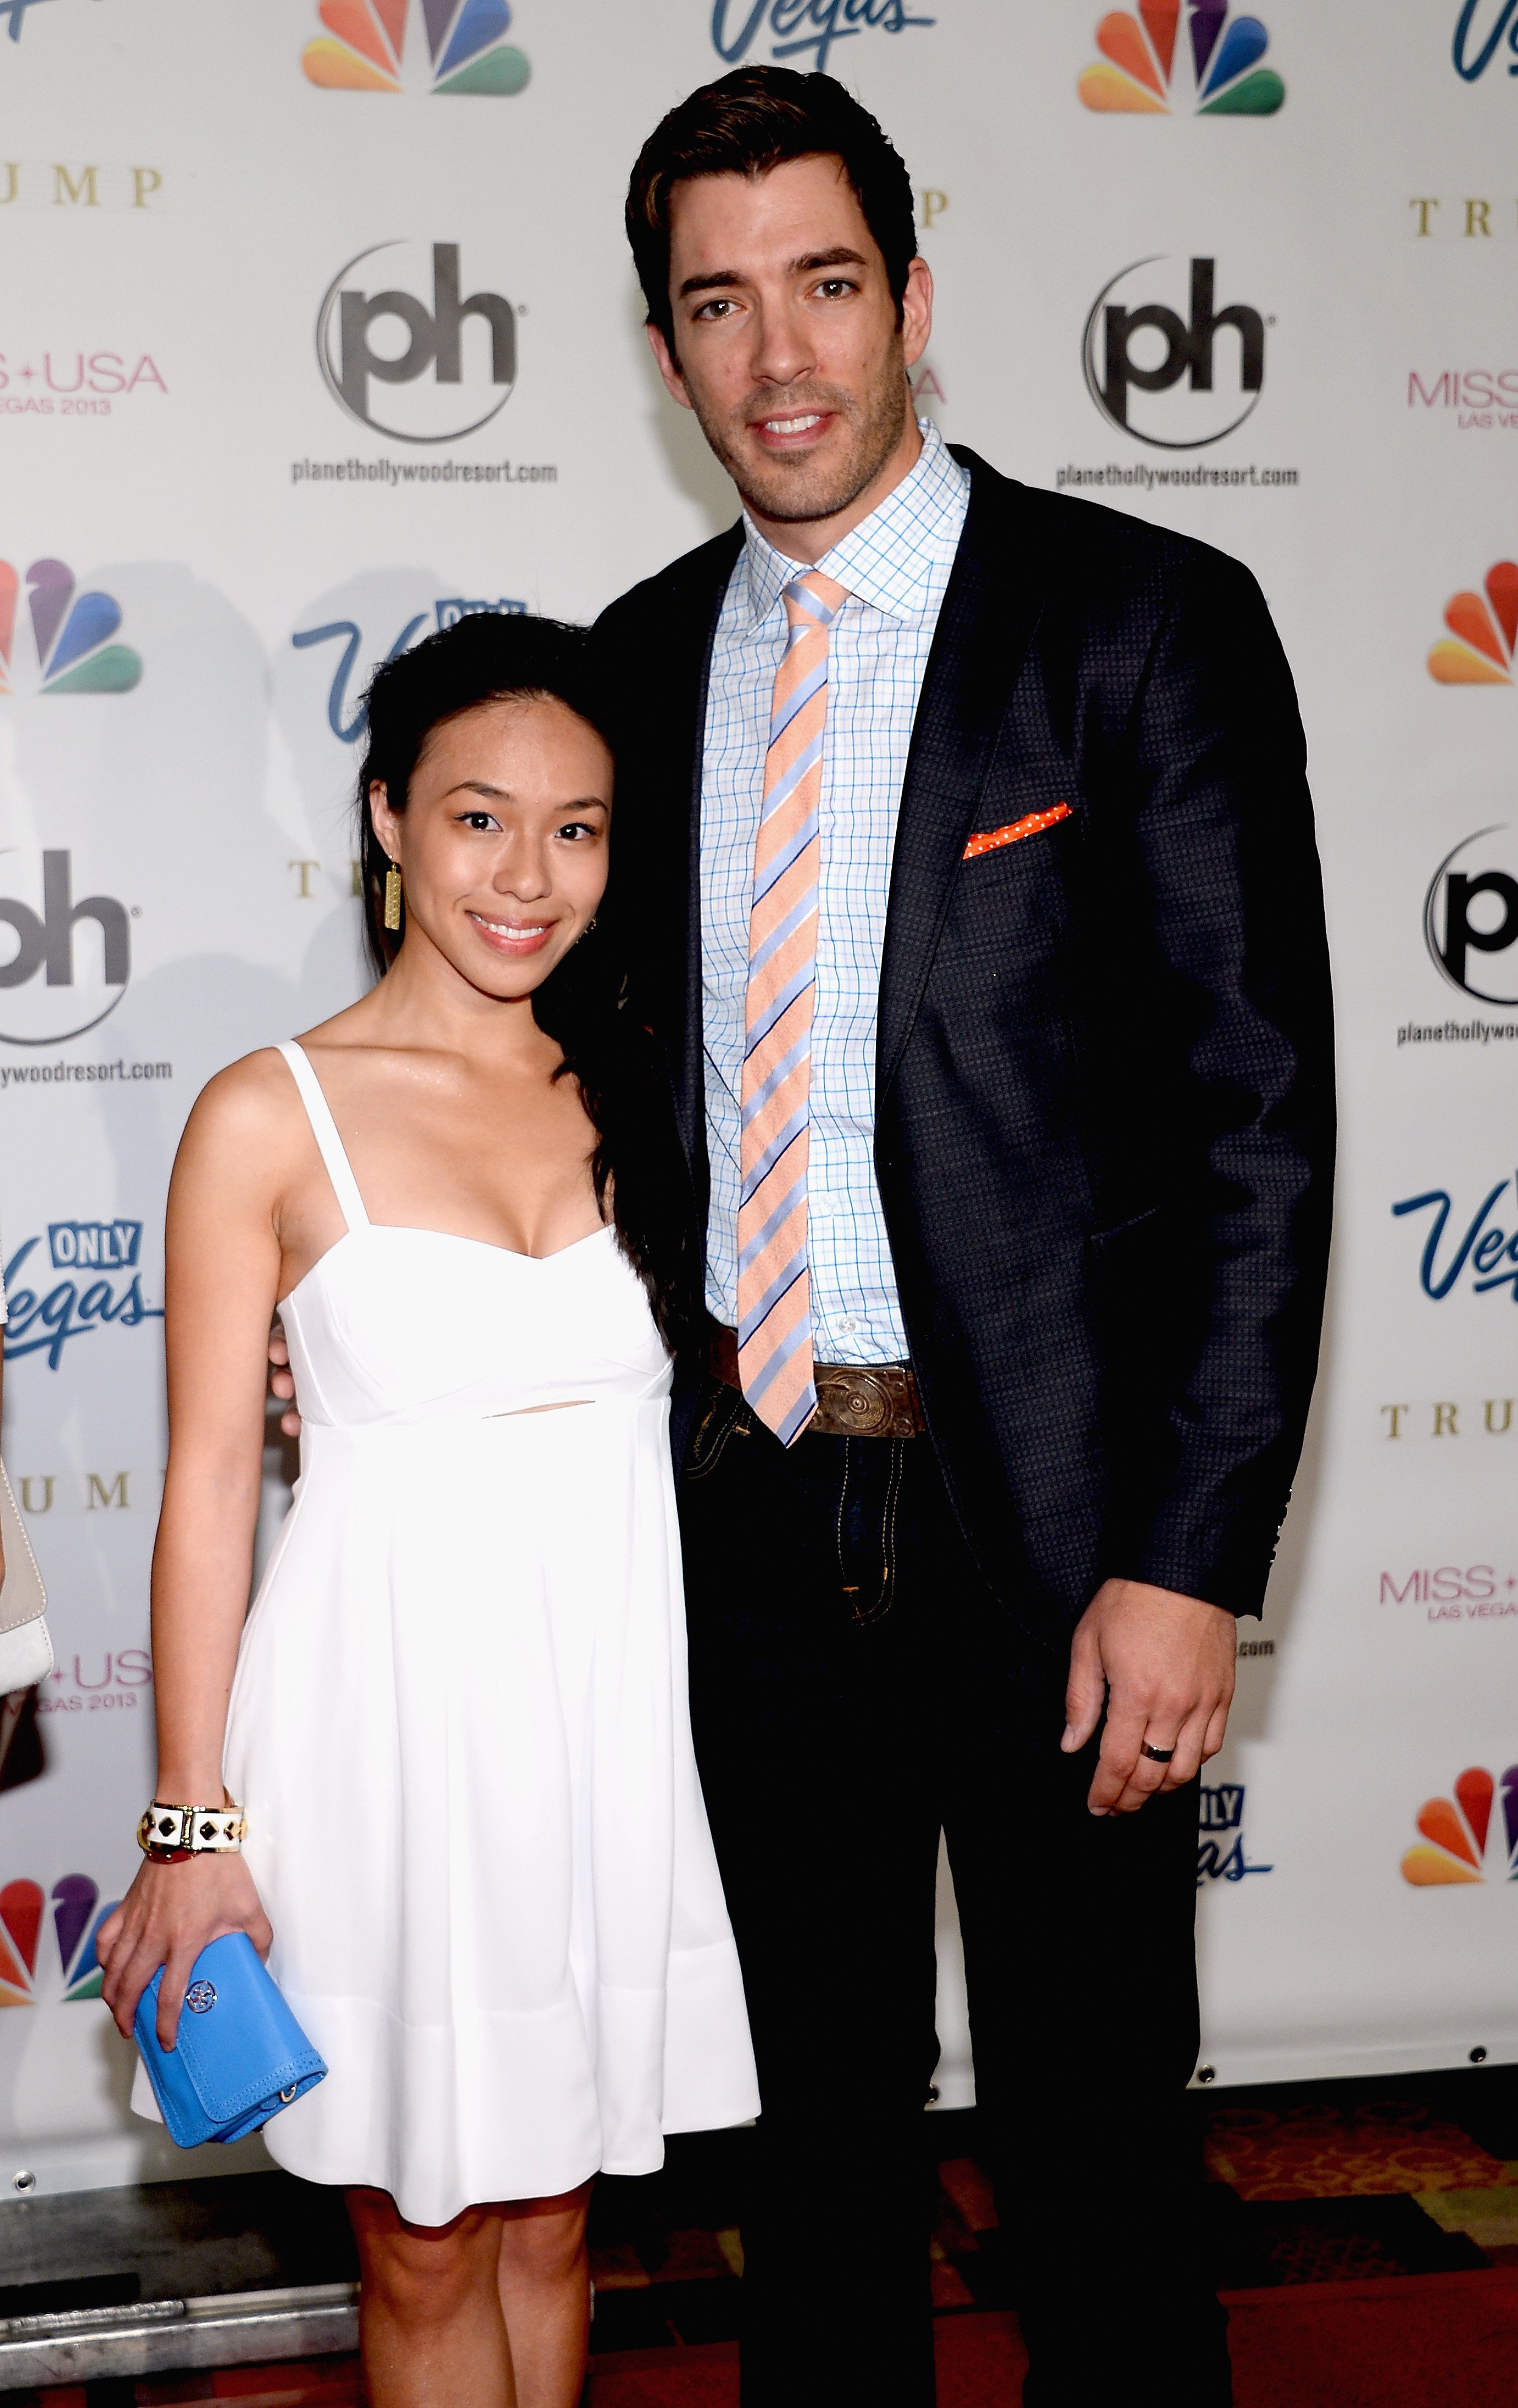 Linda Phan and Drew Scott at the Miss USA pageant on June 16, 2013, in Las Vegas, Nevada. | Source: Ethan Miller/Getty Images